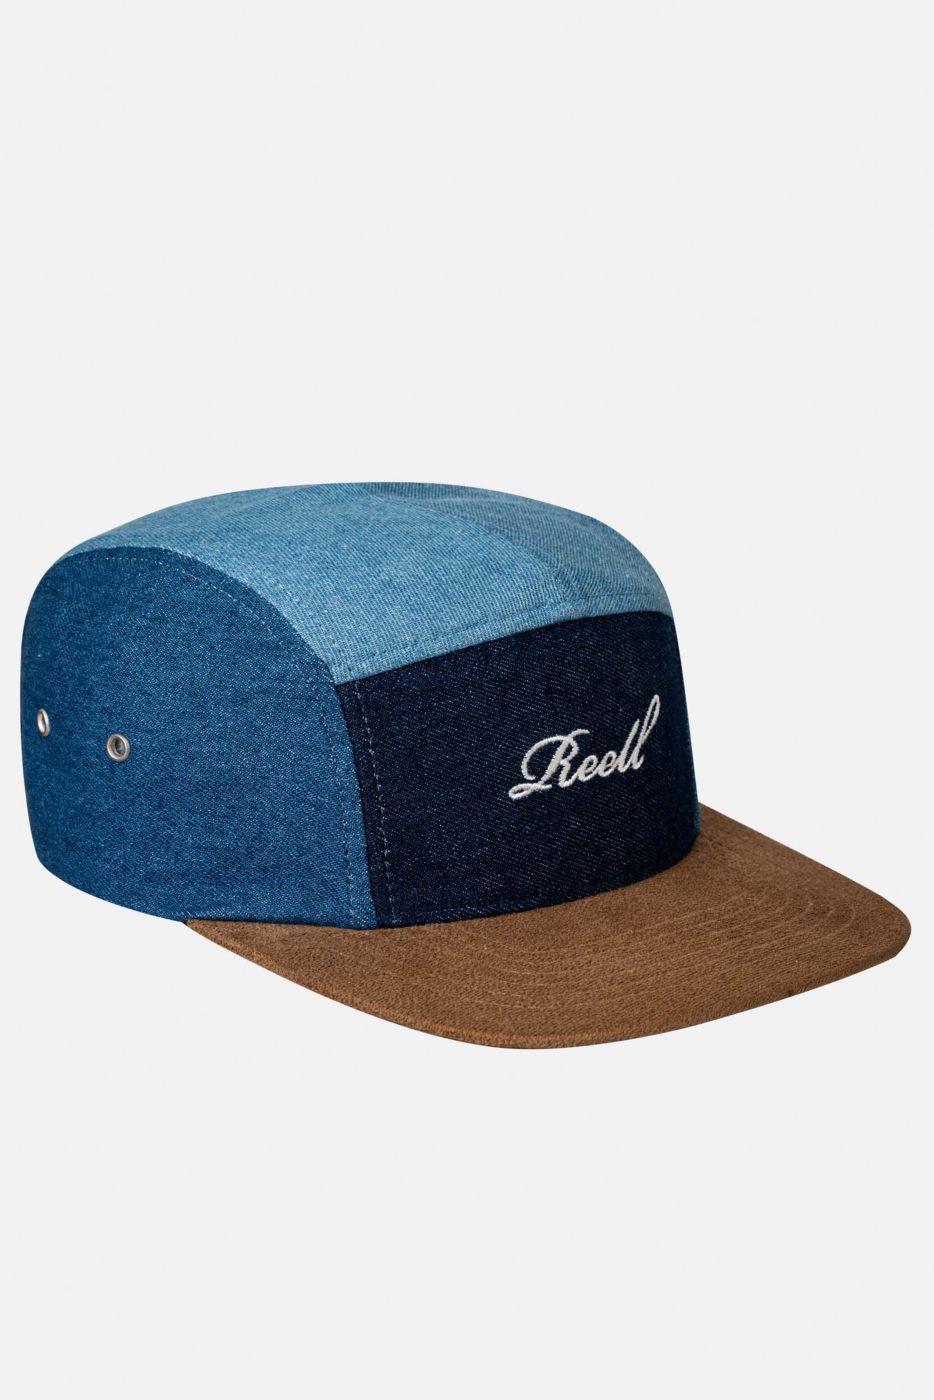 Cap, Multi | The Official Reell Shop